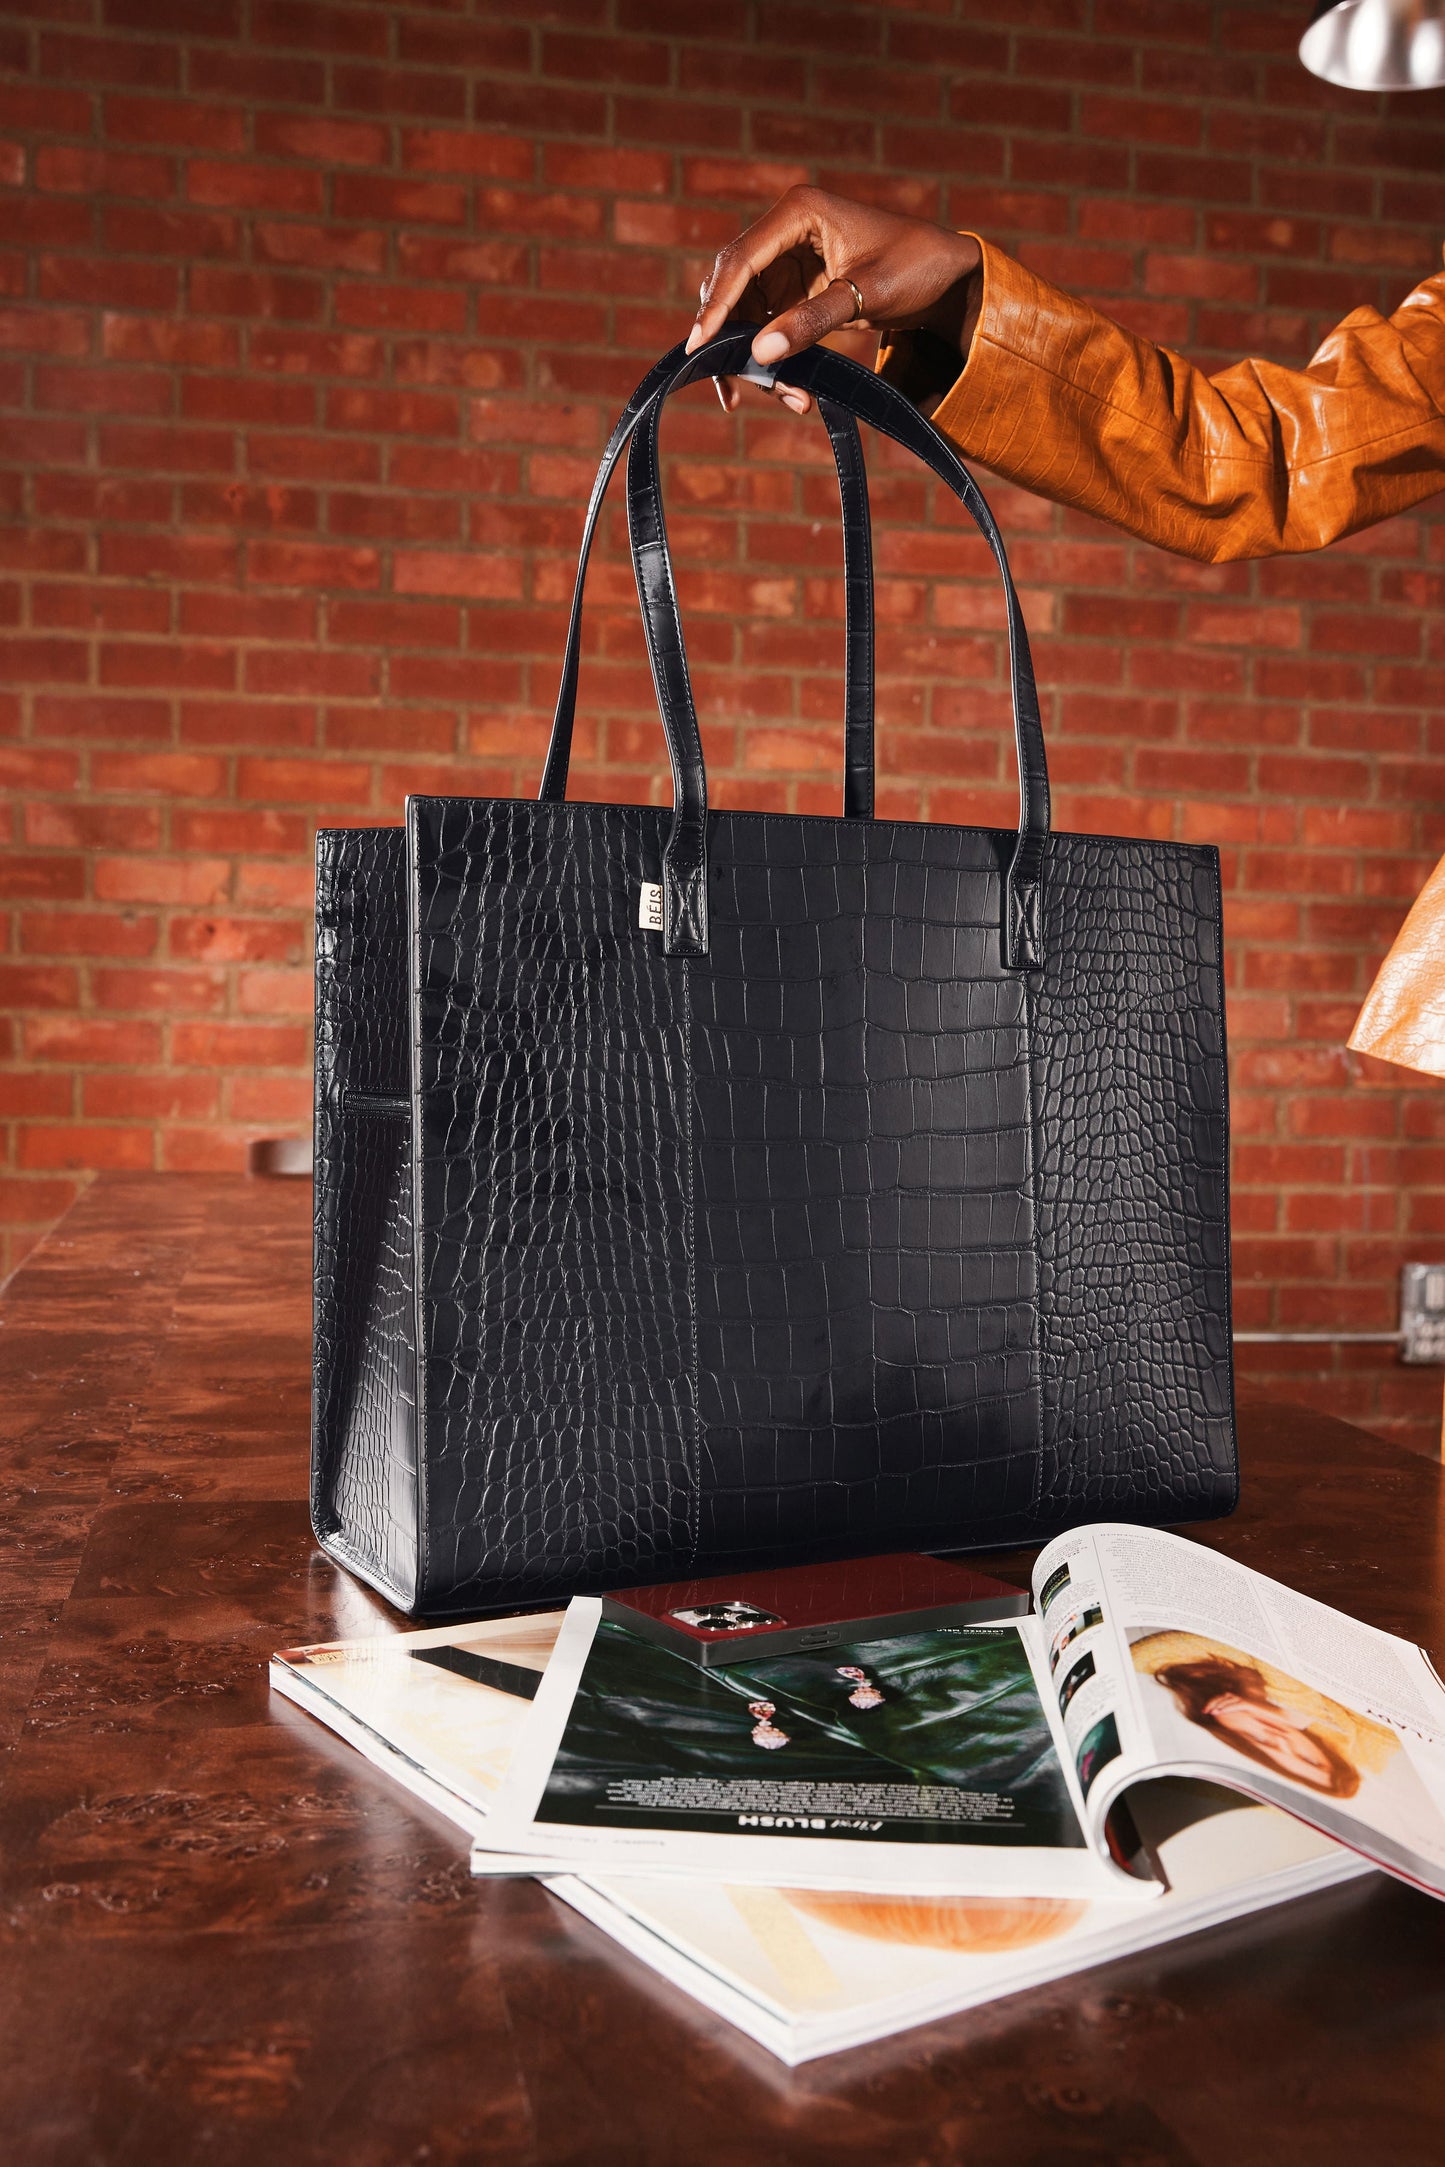 The Large Work Tote in Black Croc